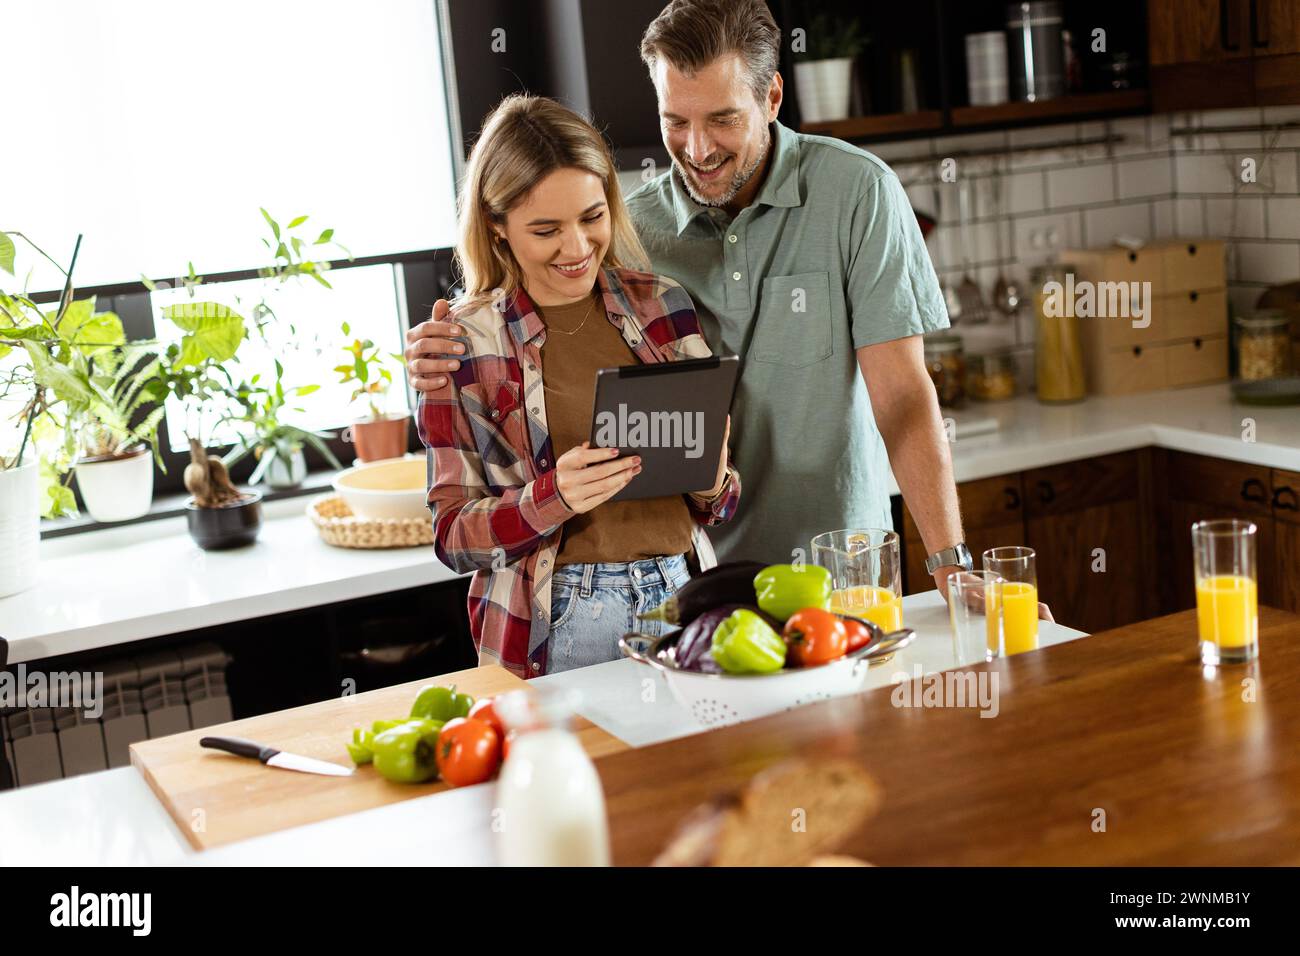 A cheerful couple stands in a well-lit kitchen, engrossed in a digital tablet among fresh ingredients Stock Photo